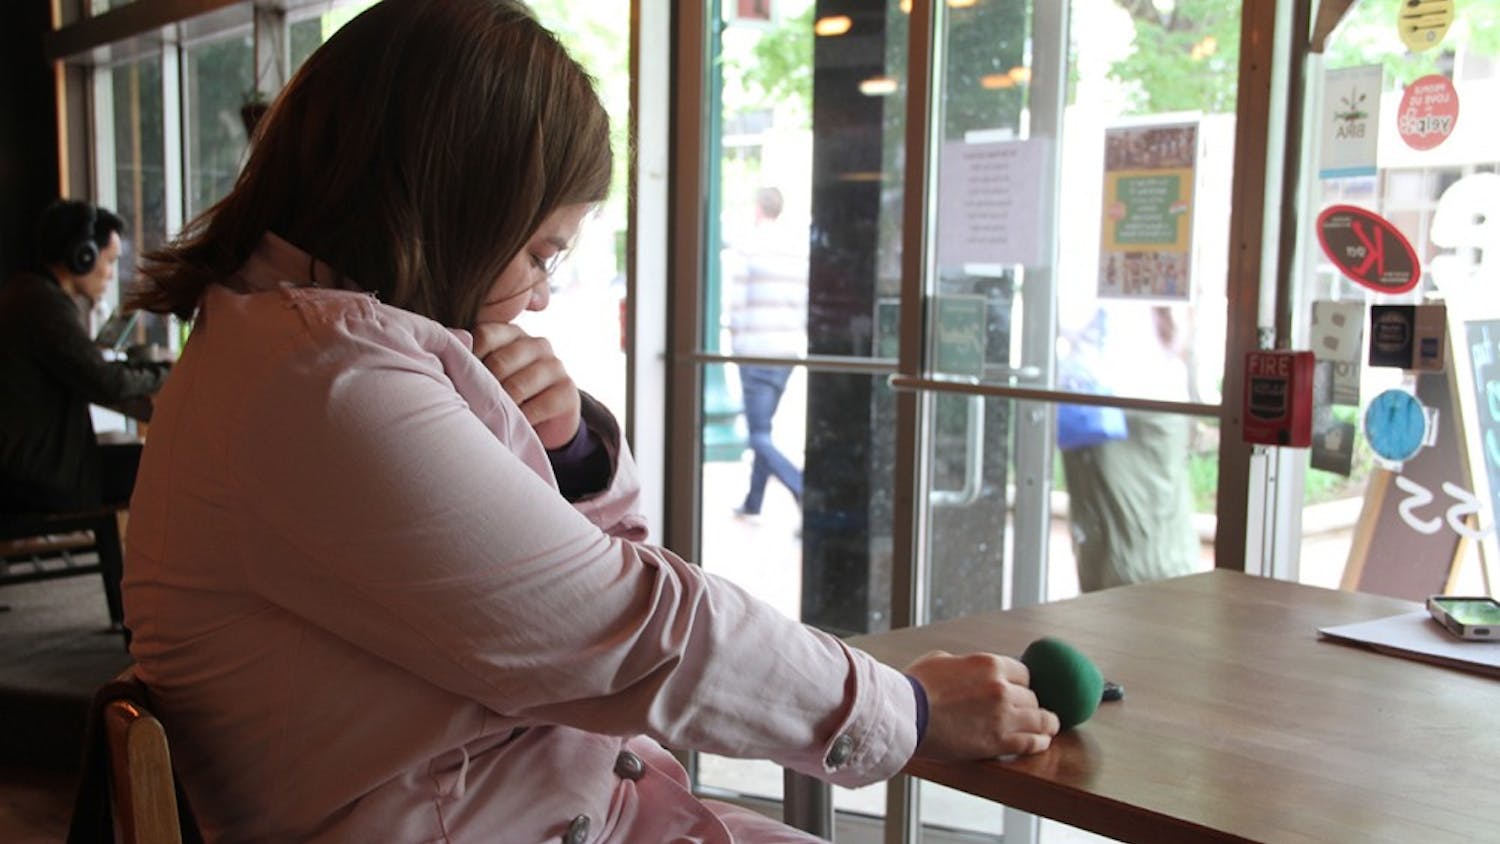 Amanda has been diagnosed with post-traumatic stress disorder, depression and anxiety, which she traces back to her father's abuse. She plays with her green stress ball when she gets anxious.